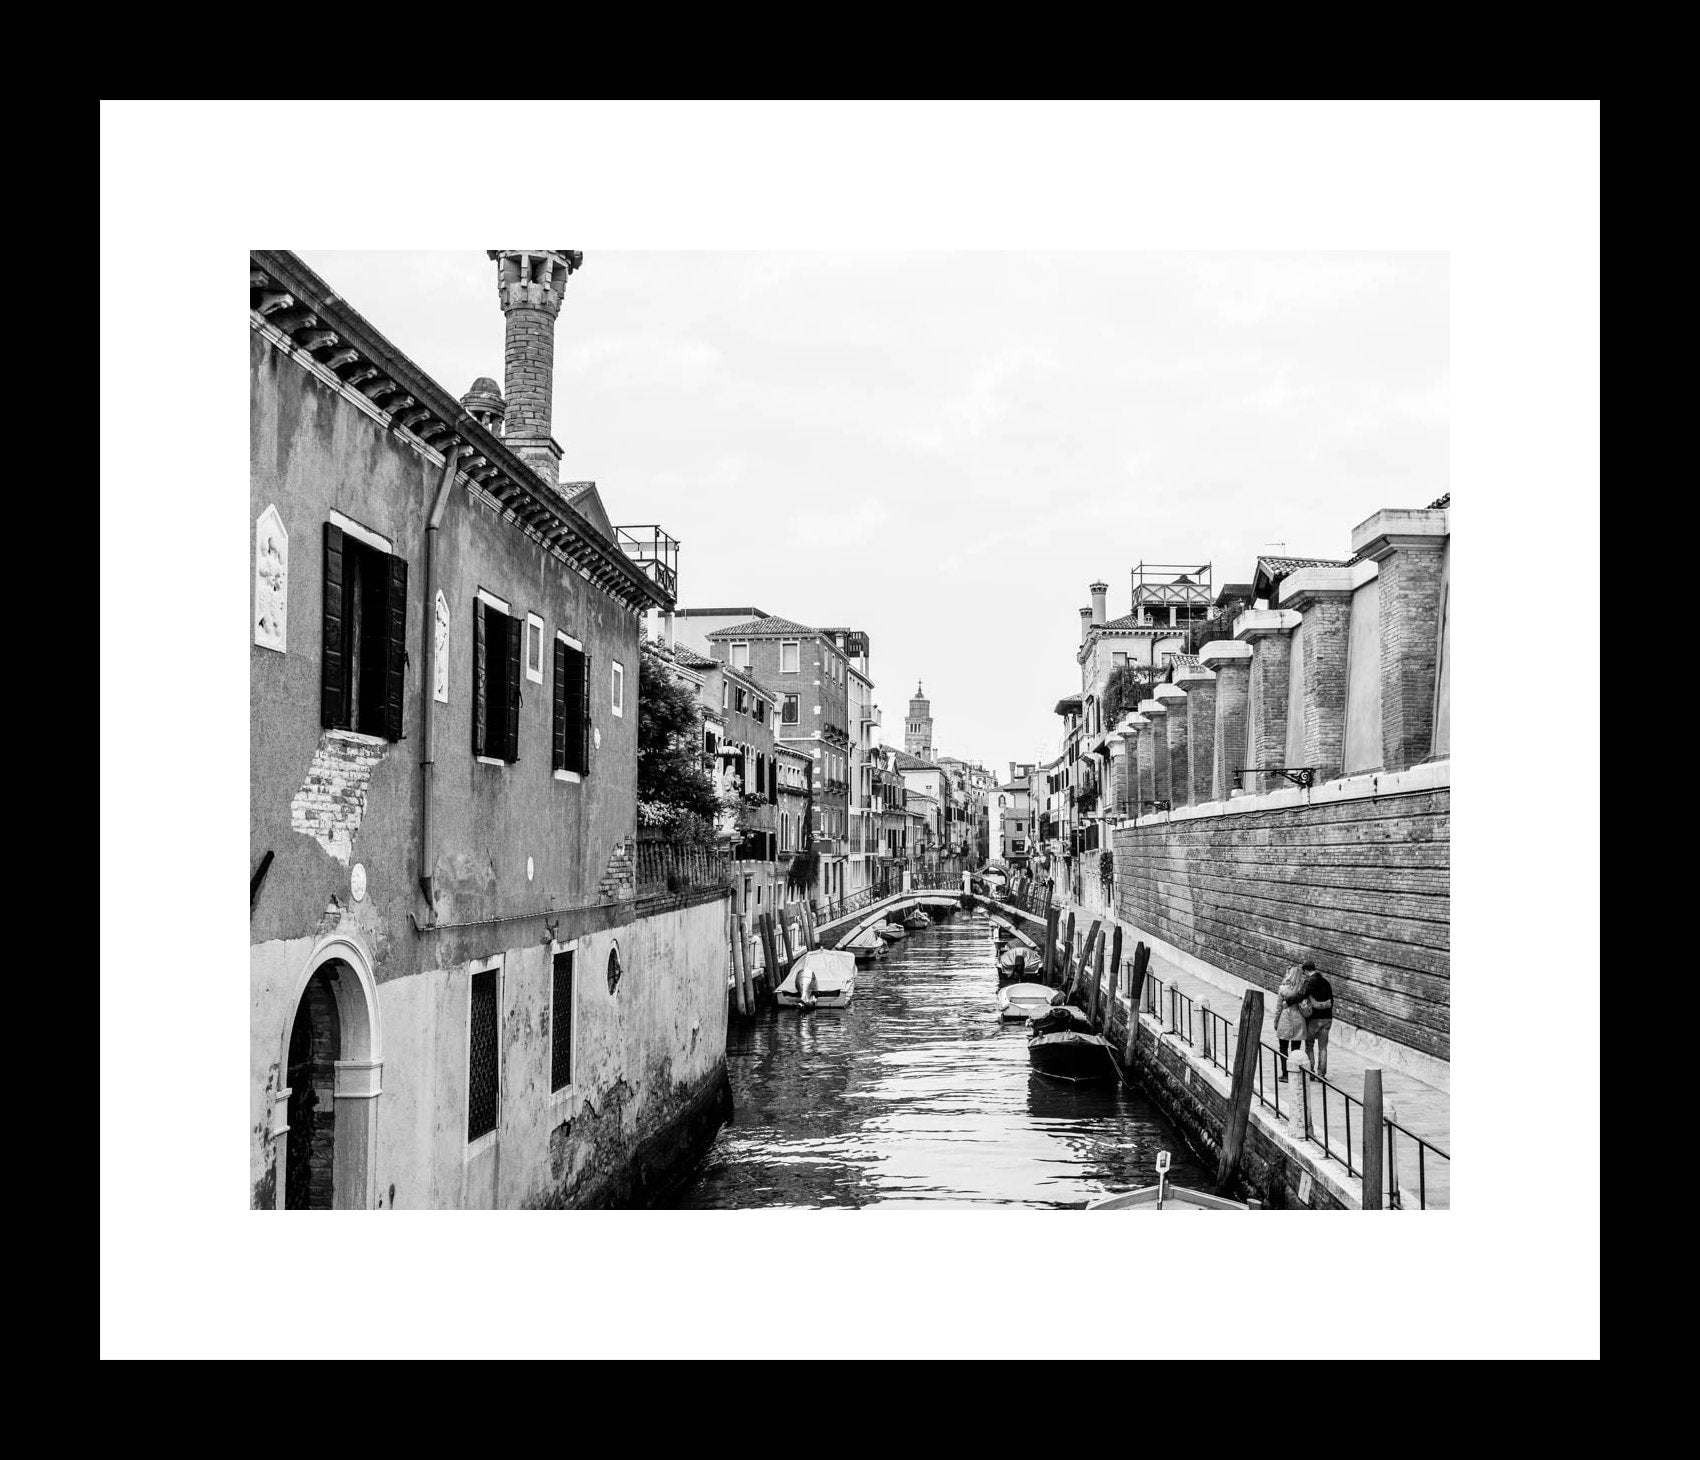 Black and White Venice Italy Art Print, Canal Landscape Print, Italian Architecture, Unframed Print or Canvas - eireanneilis